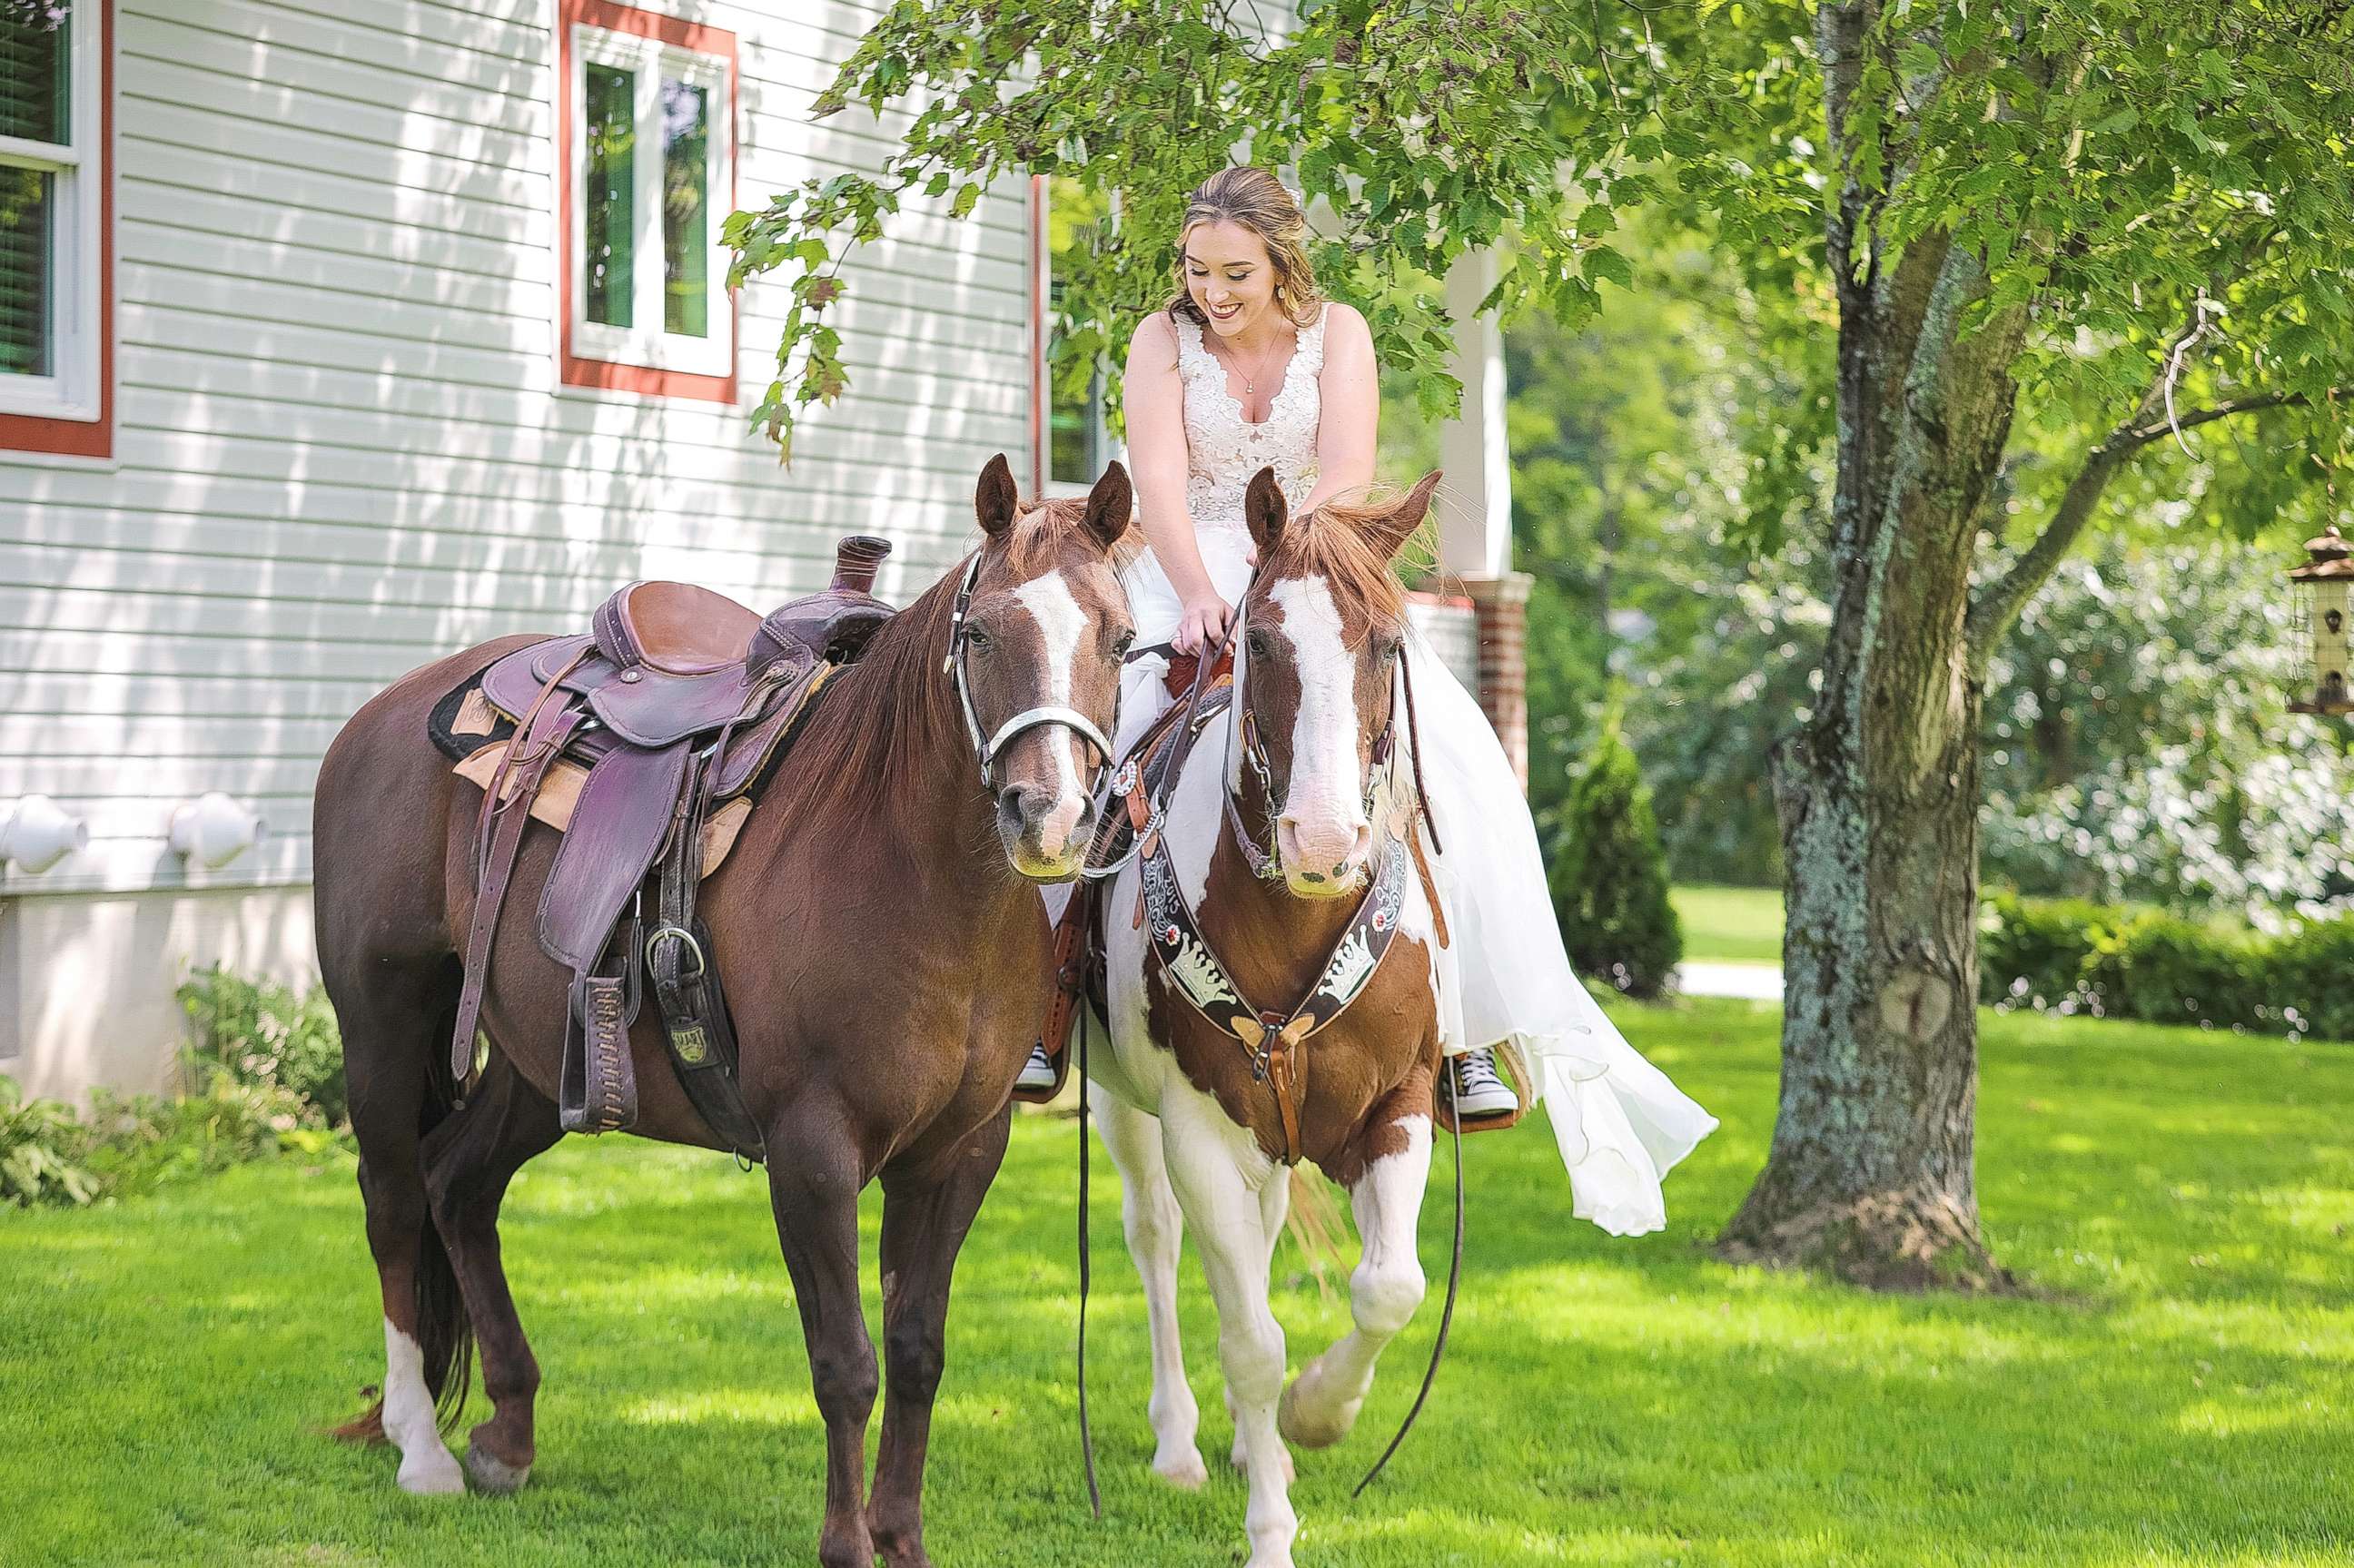 PHOTO: Patti Womer, 21, seen riding on her horse Cricket as her horse Dutch rode along side her on her wedding day, Sept. 9, 2017. 